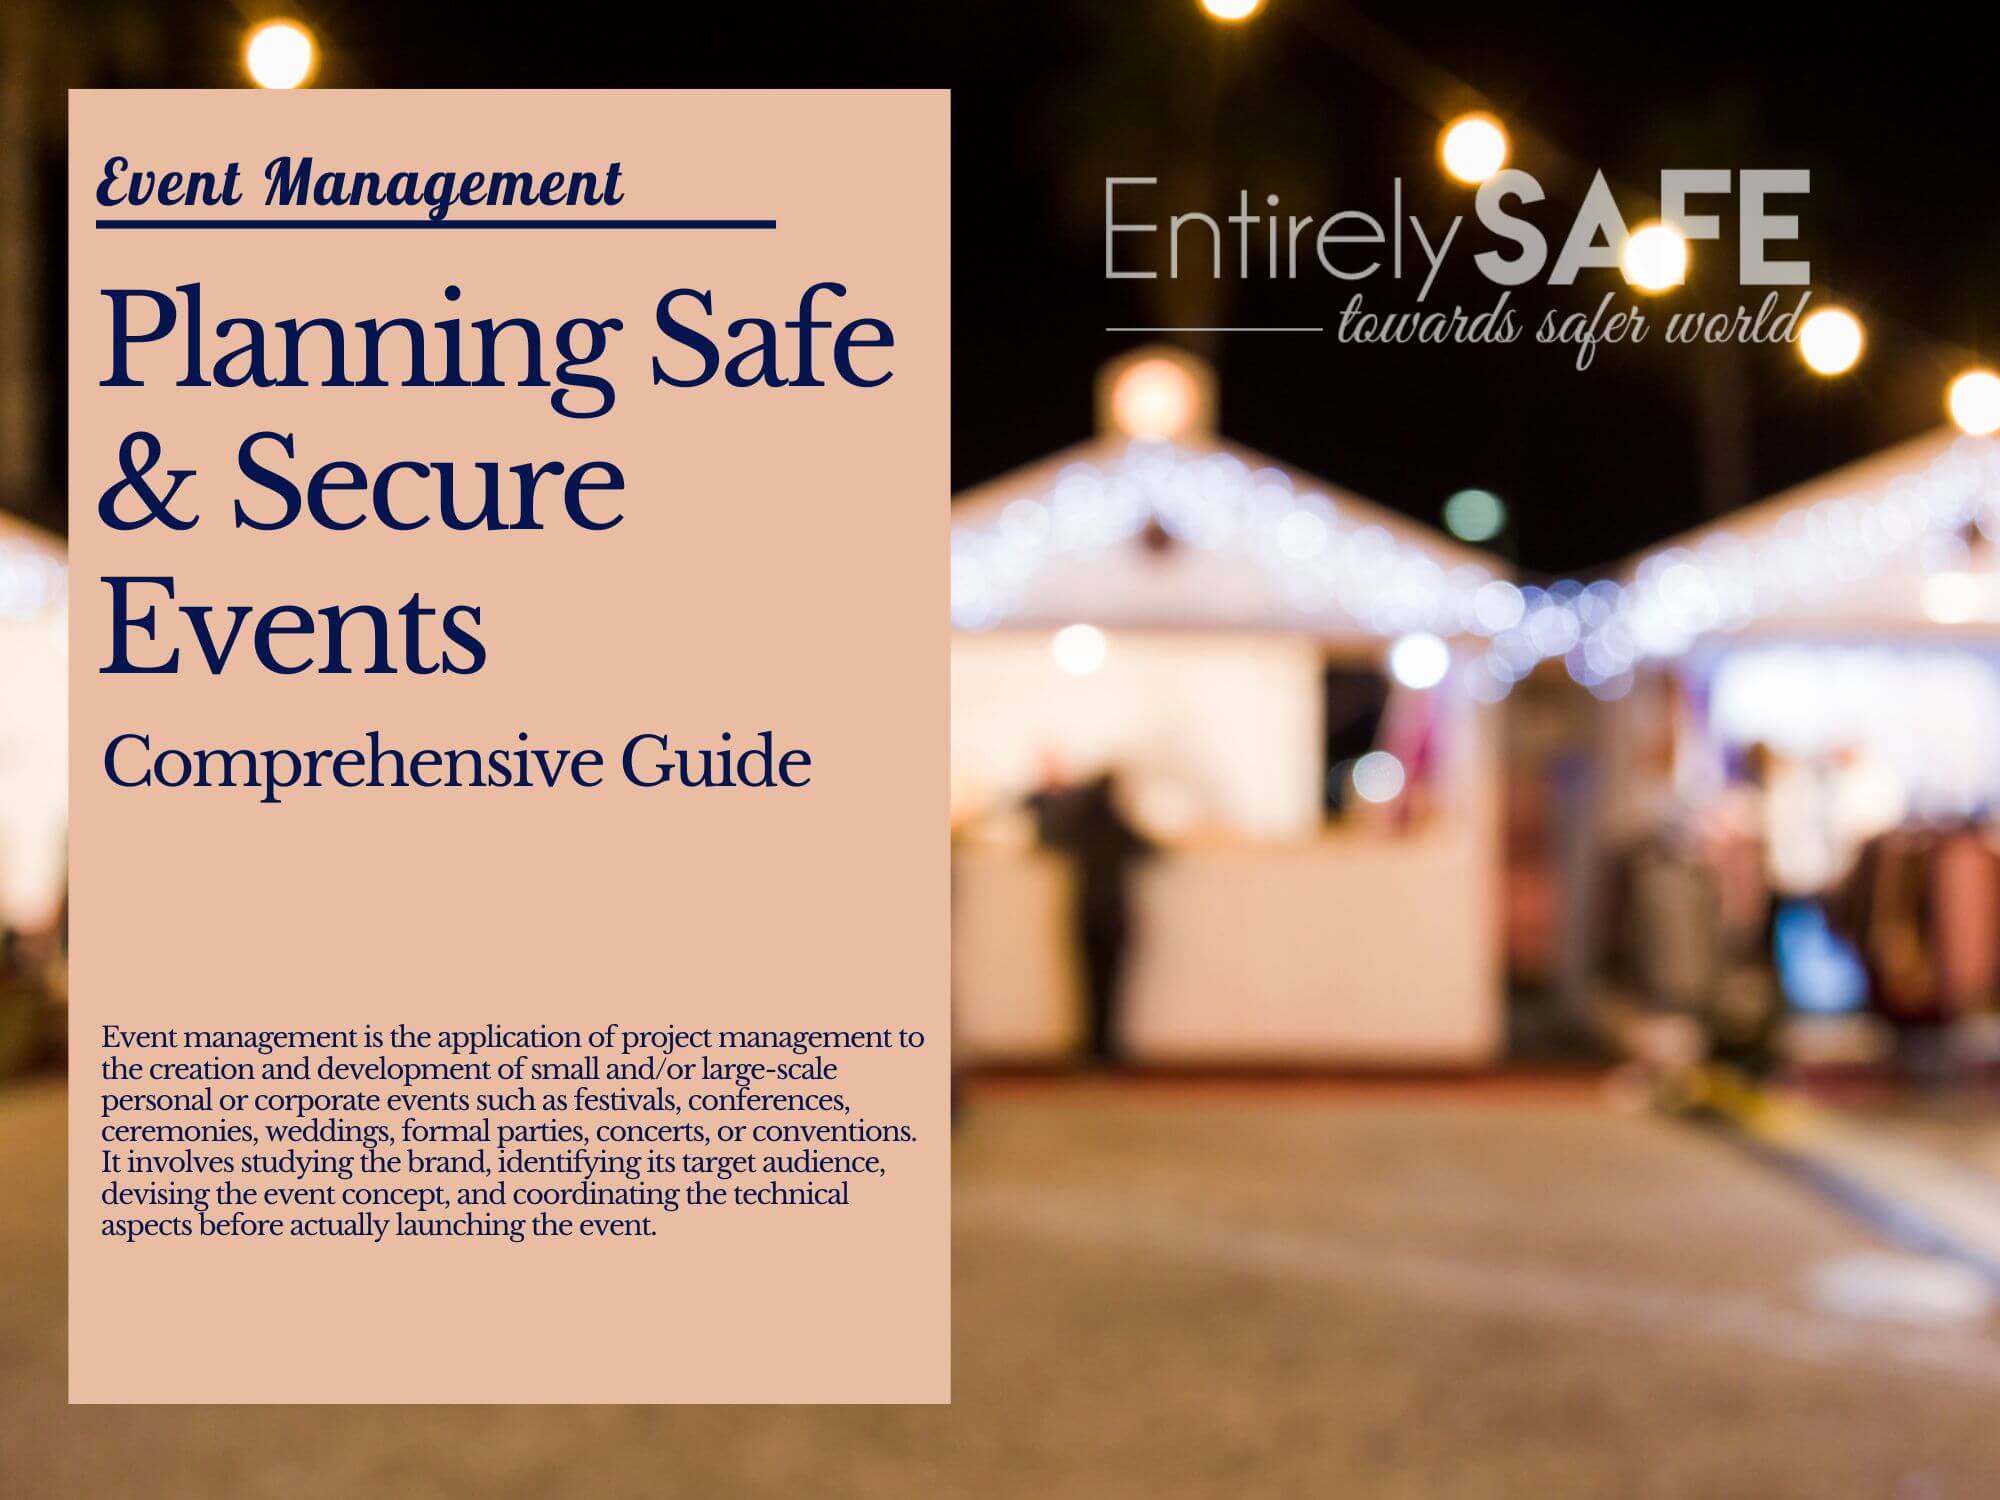 Planning-Safe-and-Secure-Events-Event-Management